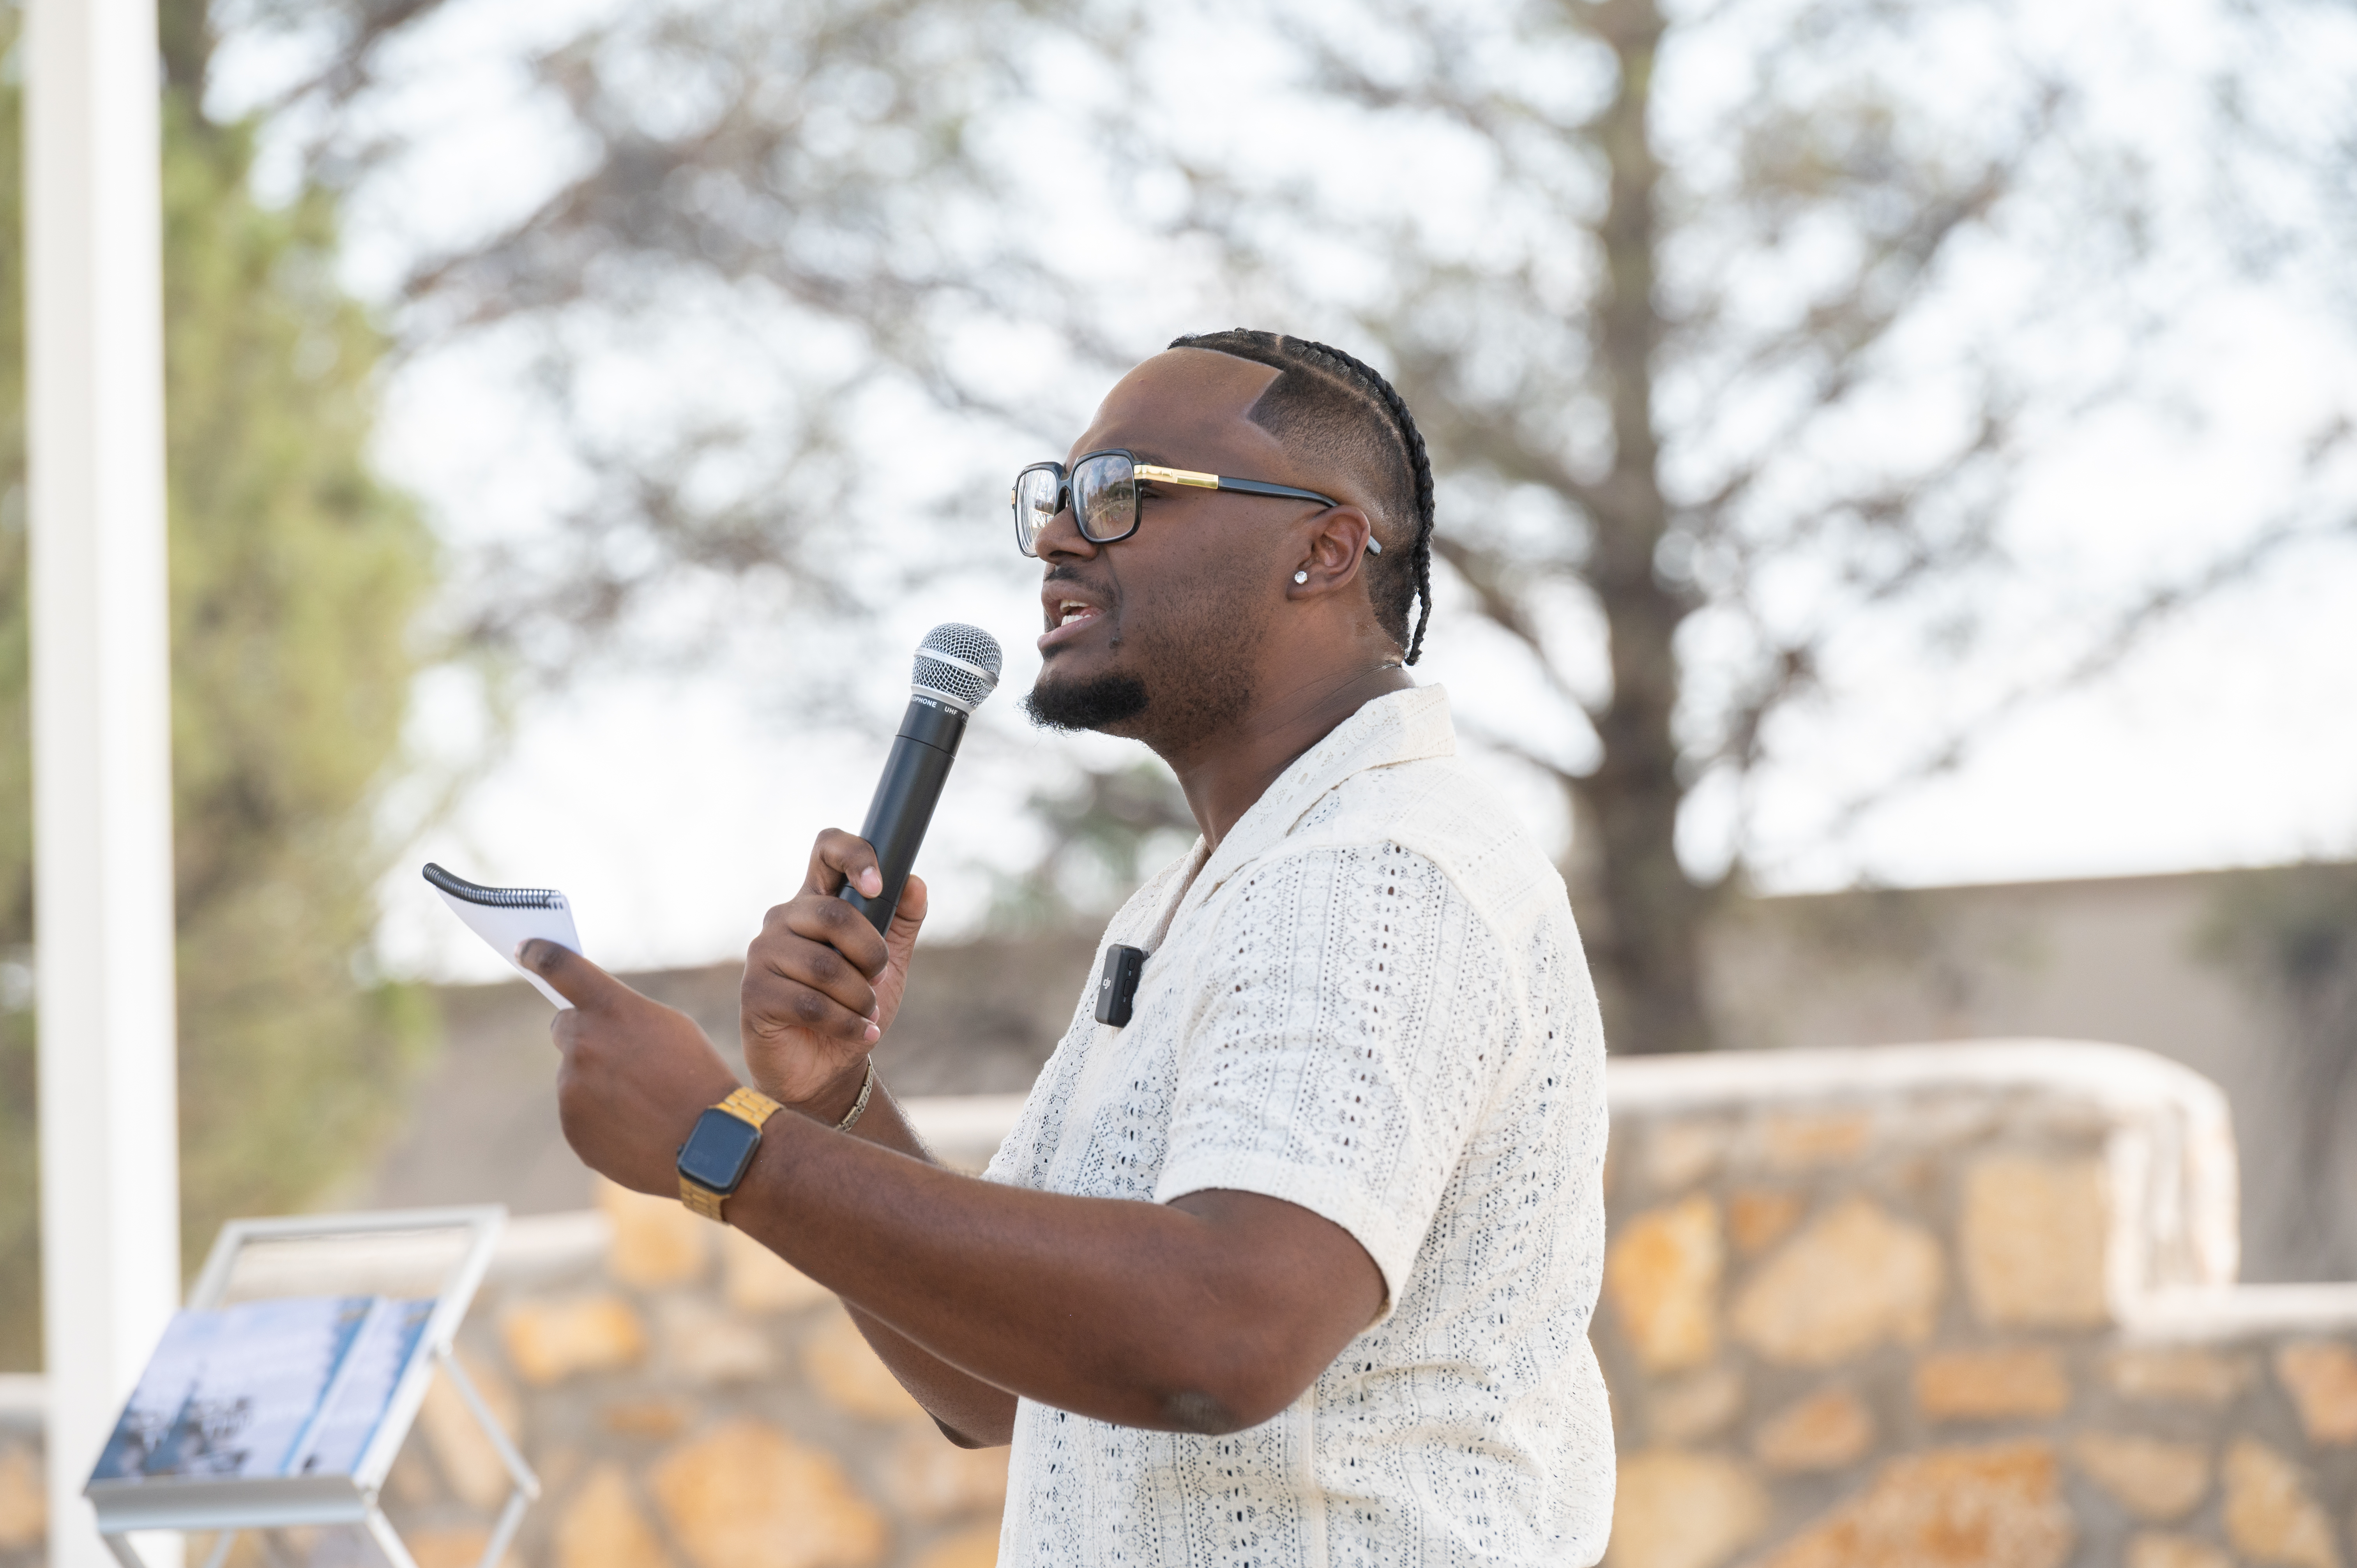 The image shows a person standing outdoors and speaking into a microphone. The person has braided hair and is wearing large glasses. They are dressed in a light-colored, short-sleeved, patterned shirt and a gold-colored watch. In one hand, they hold a small notebook or pad. In the background, there is a stone wall and some trees with blurred foliage, indicating a shallow depth of field for the photo.